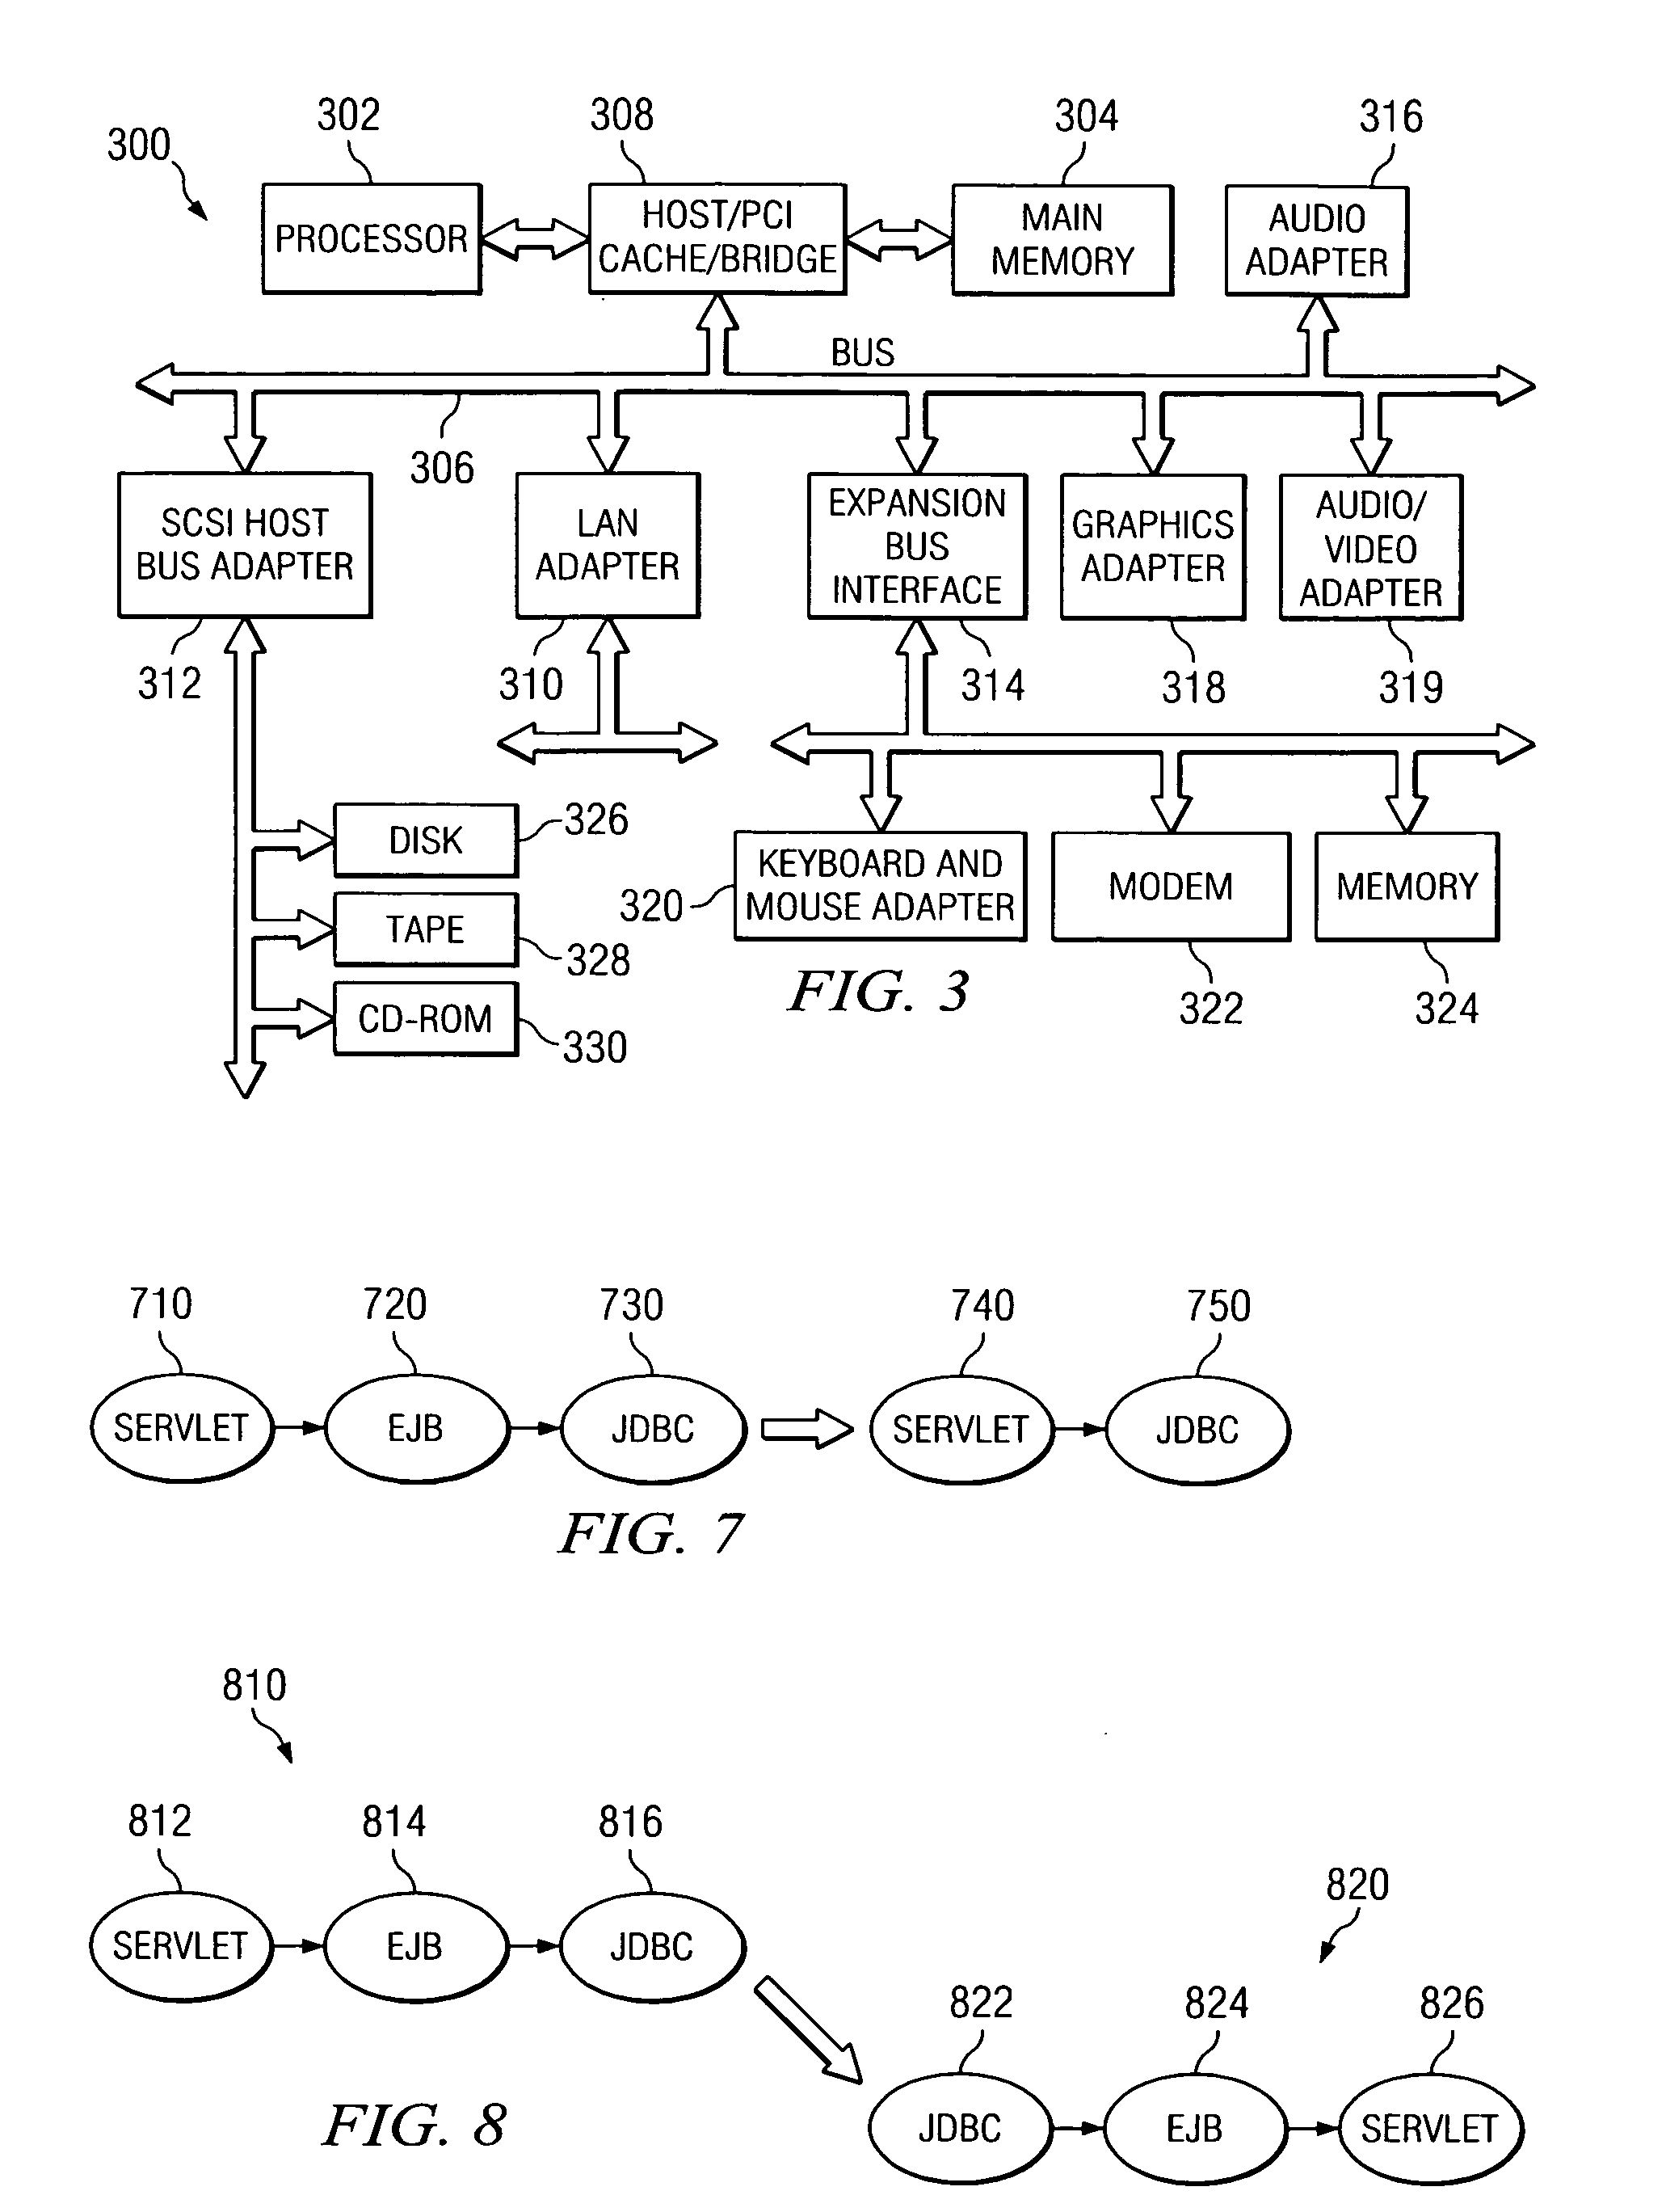 Method and apparatus for visualizing results of root cause analysis on transaction performance data